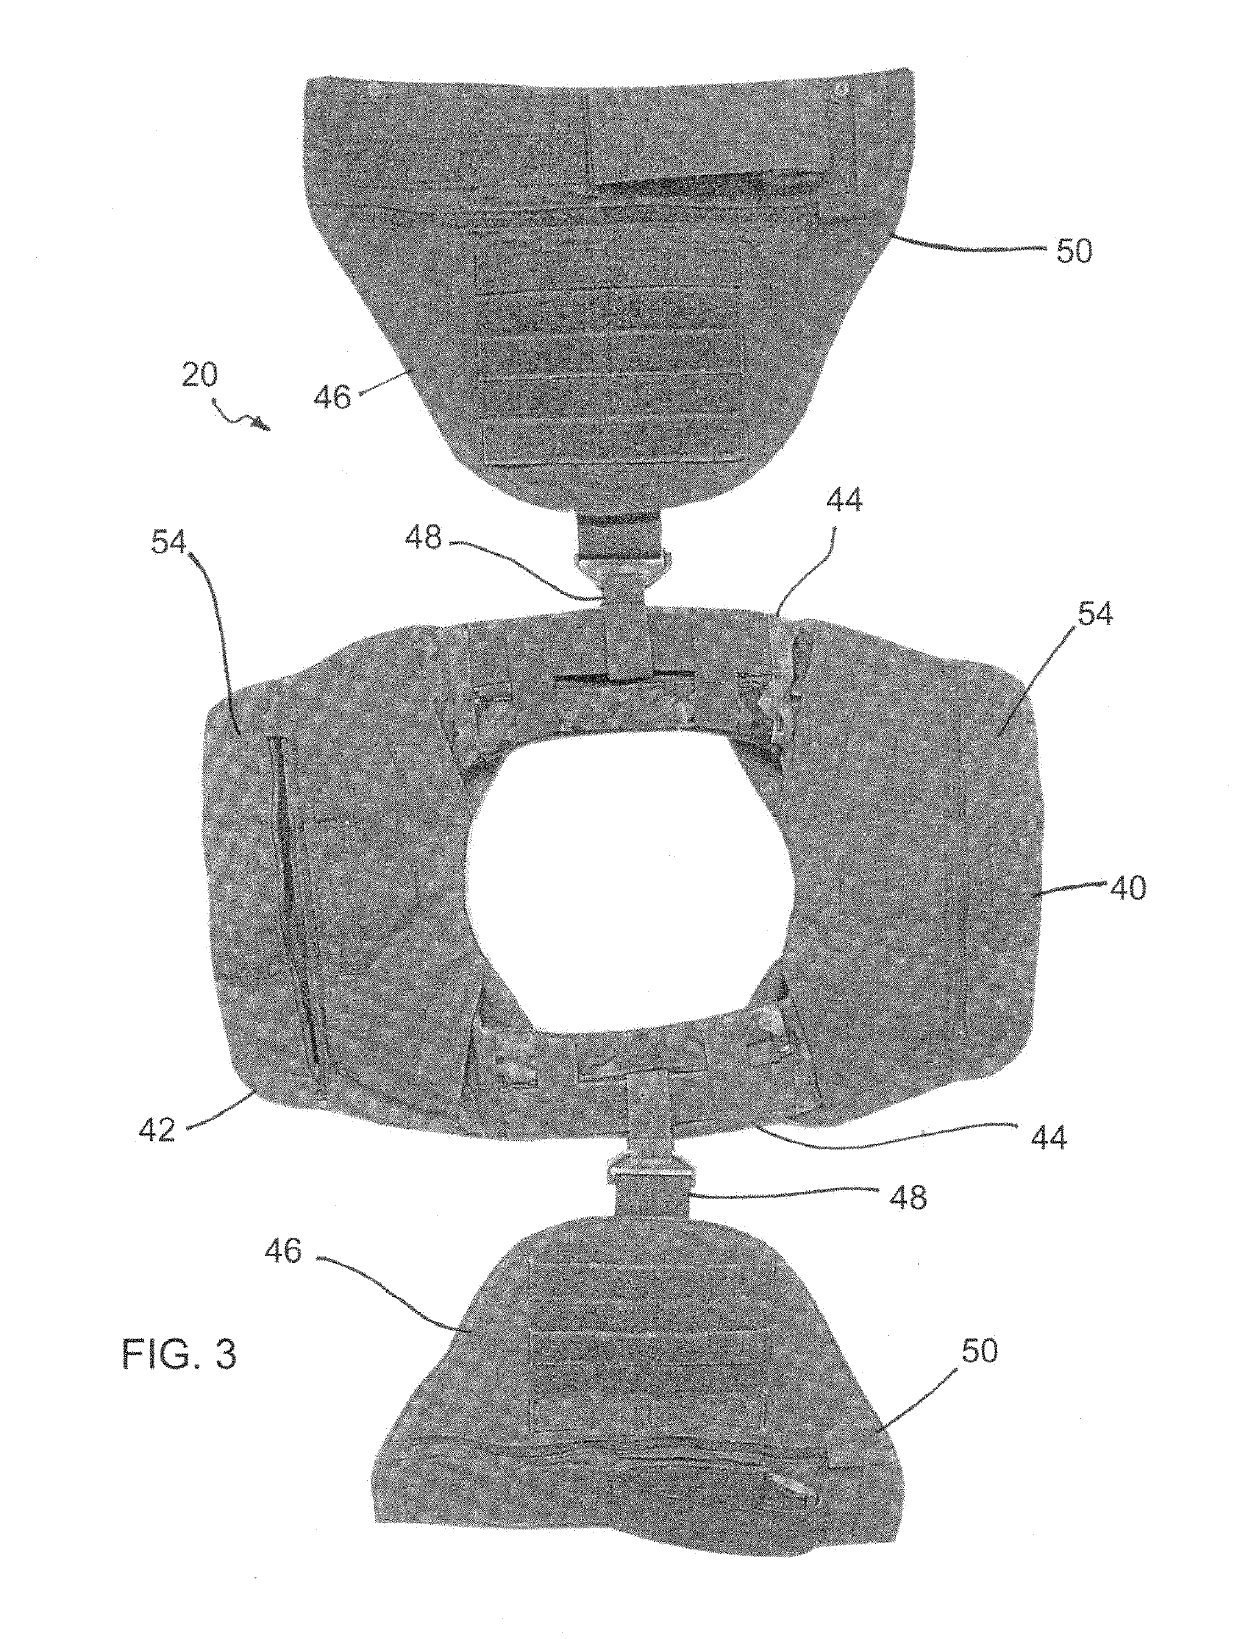 Modular armor supplement apparatus and system with silent fasteners and adjustability